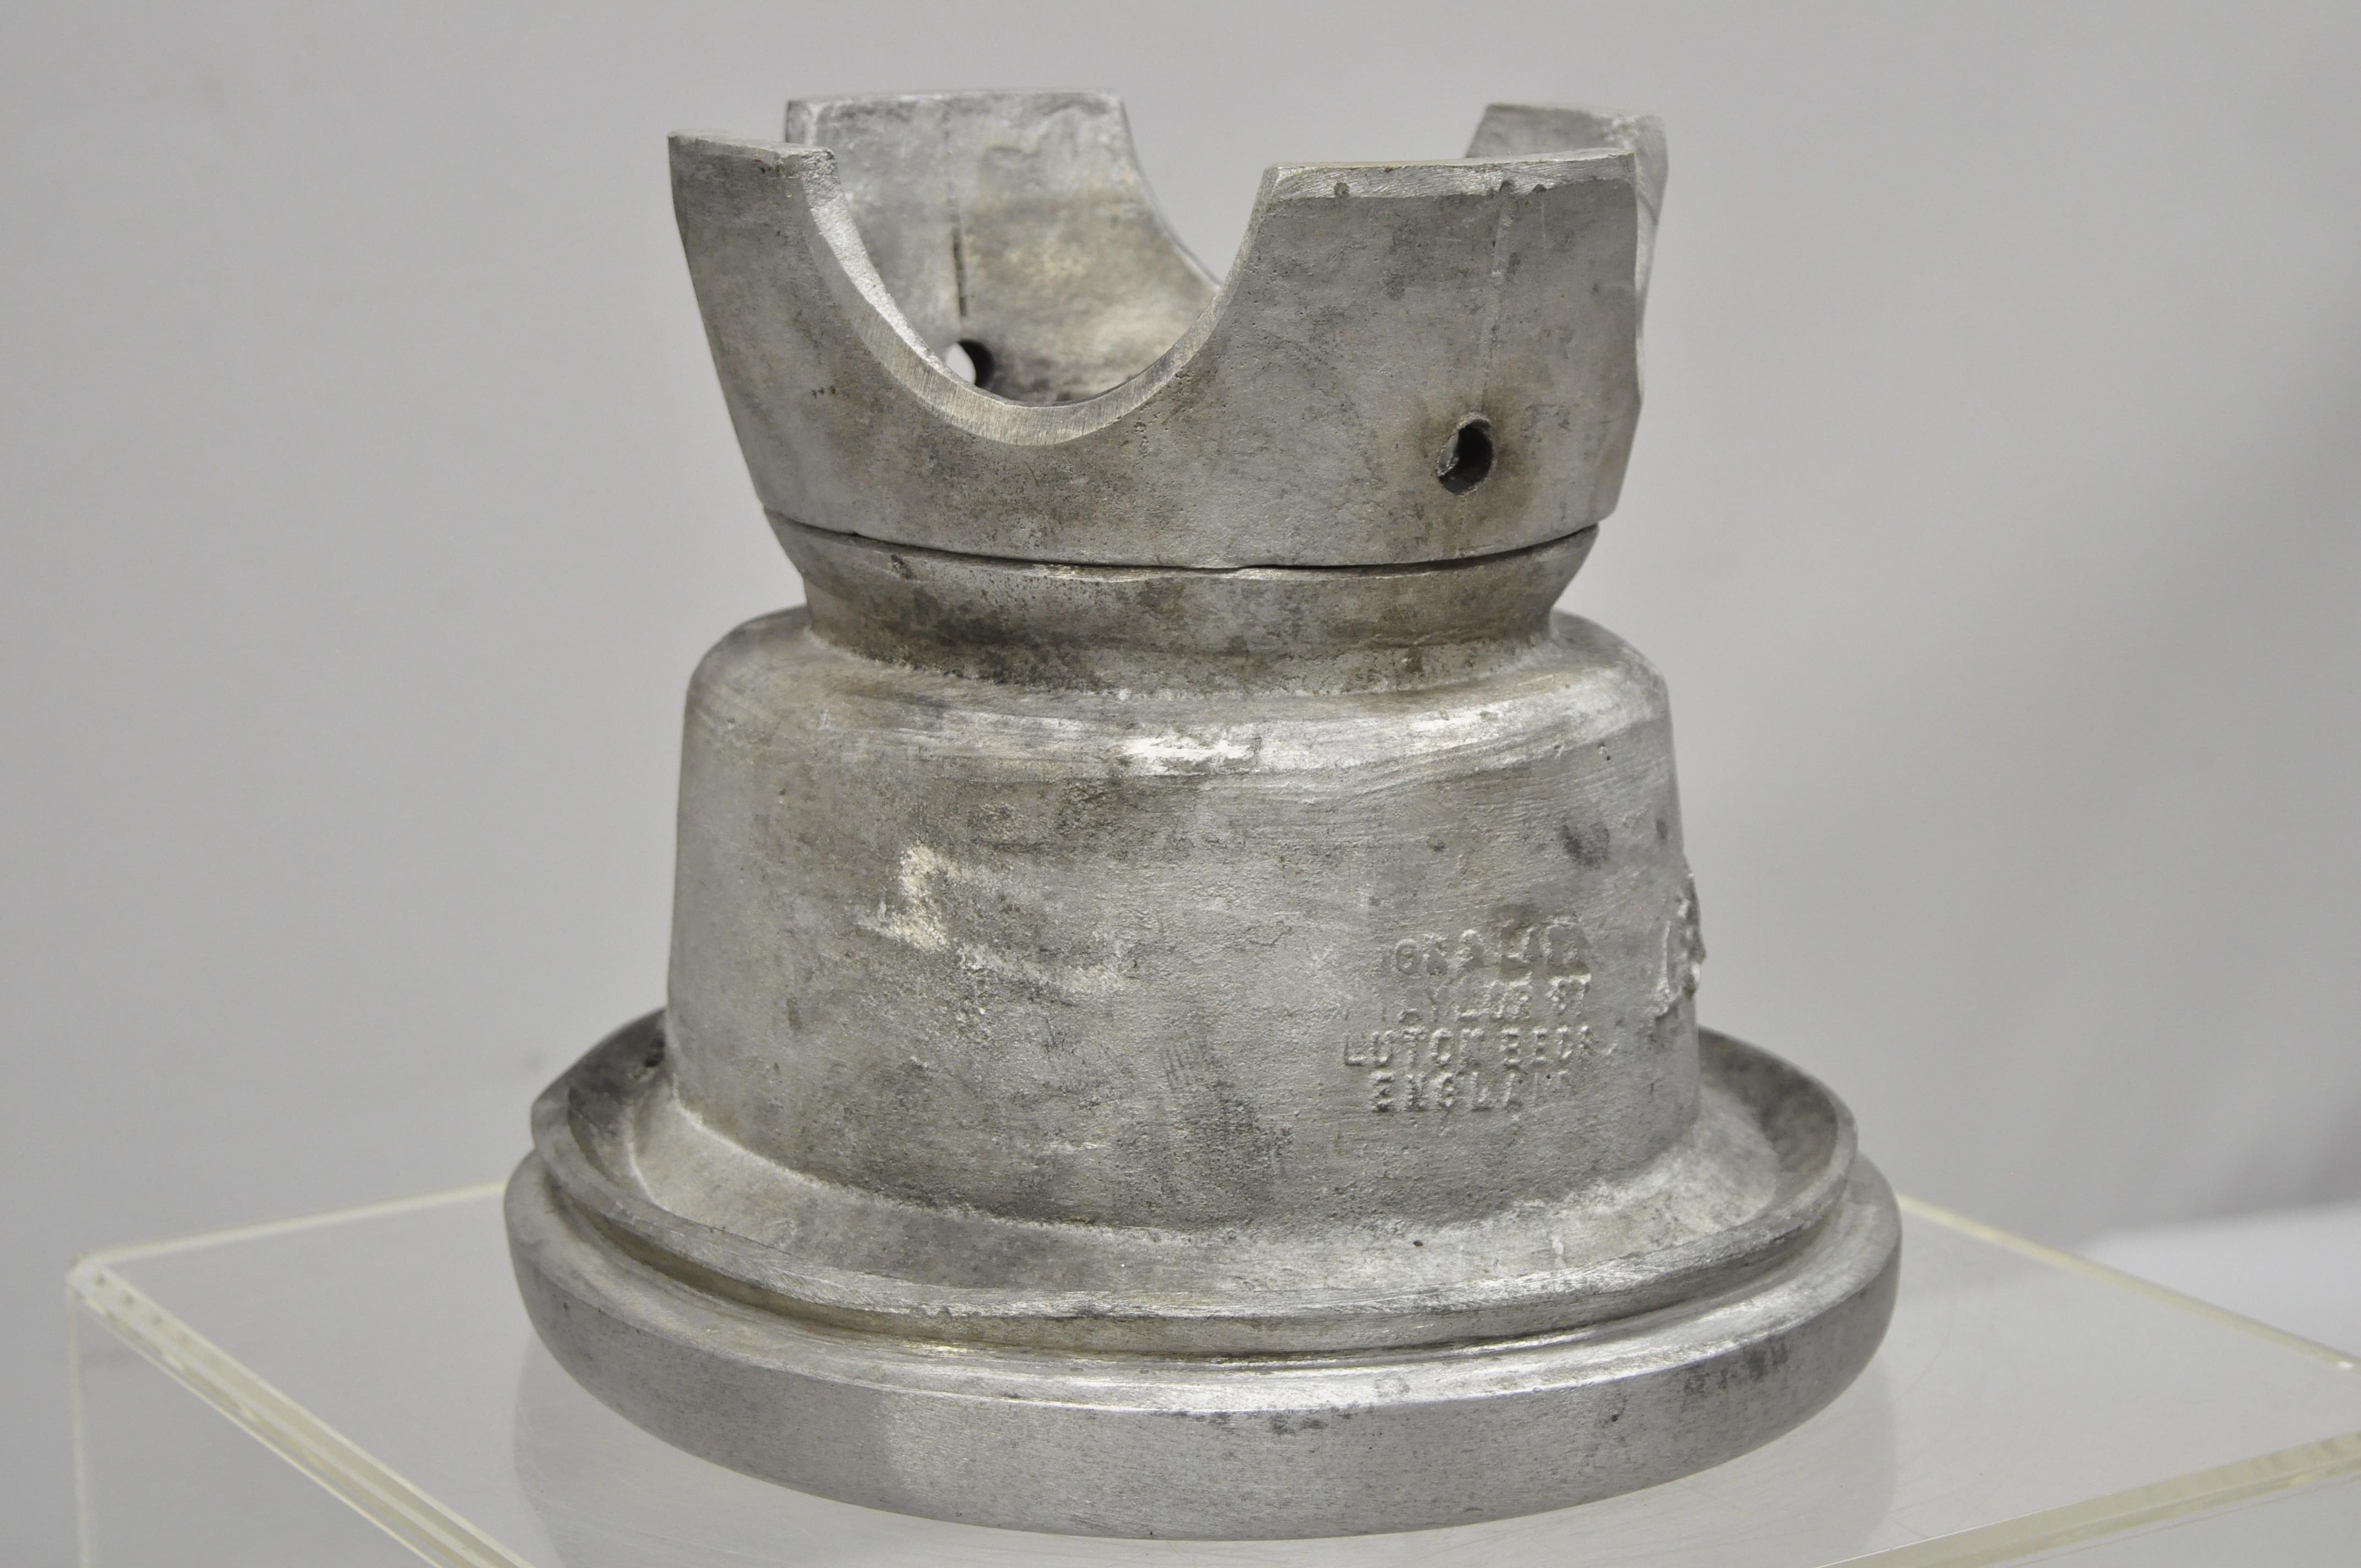 Vintage Boon & Lane Aluminum Hat Block Mold Form Millinery Luton Beds England A For Sale 4